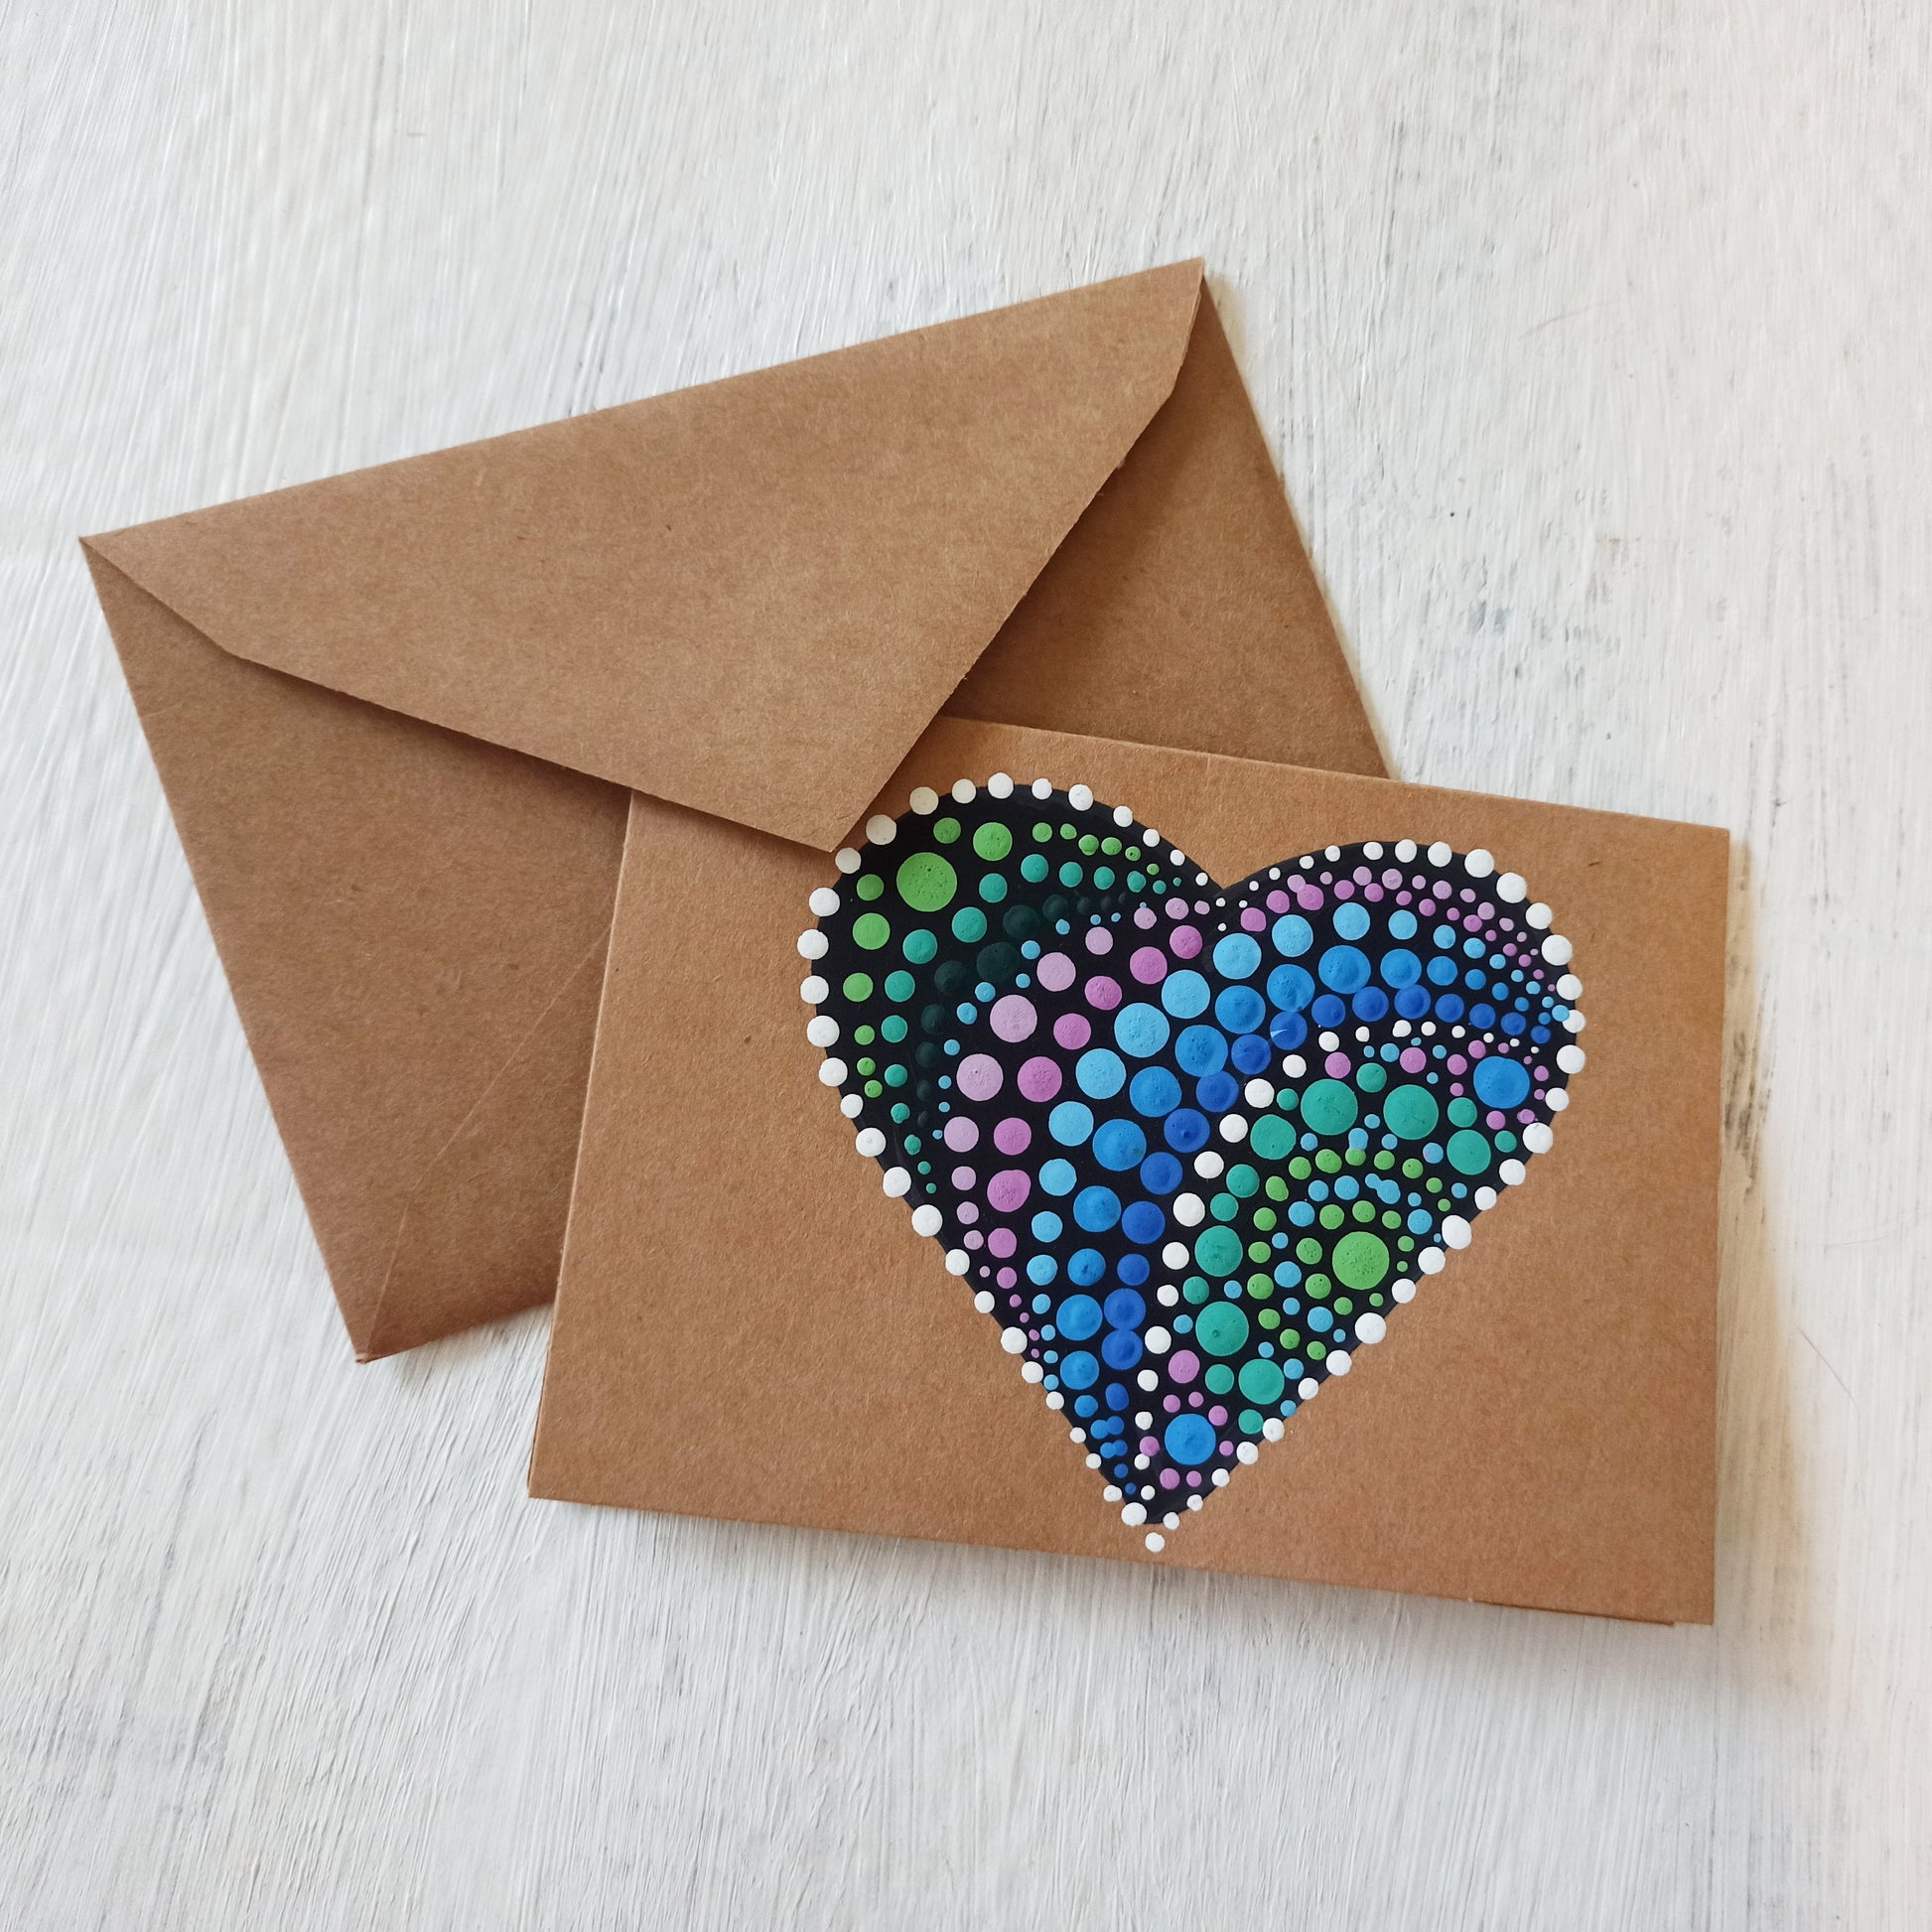 Hand Painted Heart Cards Brown Kraft greetings card for any occasion, valentines day cards